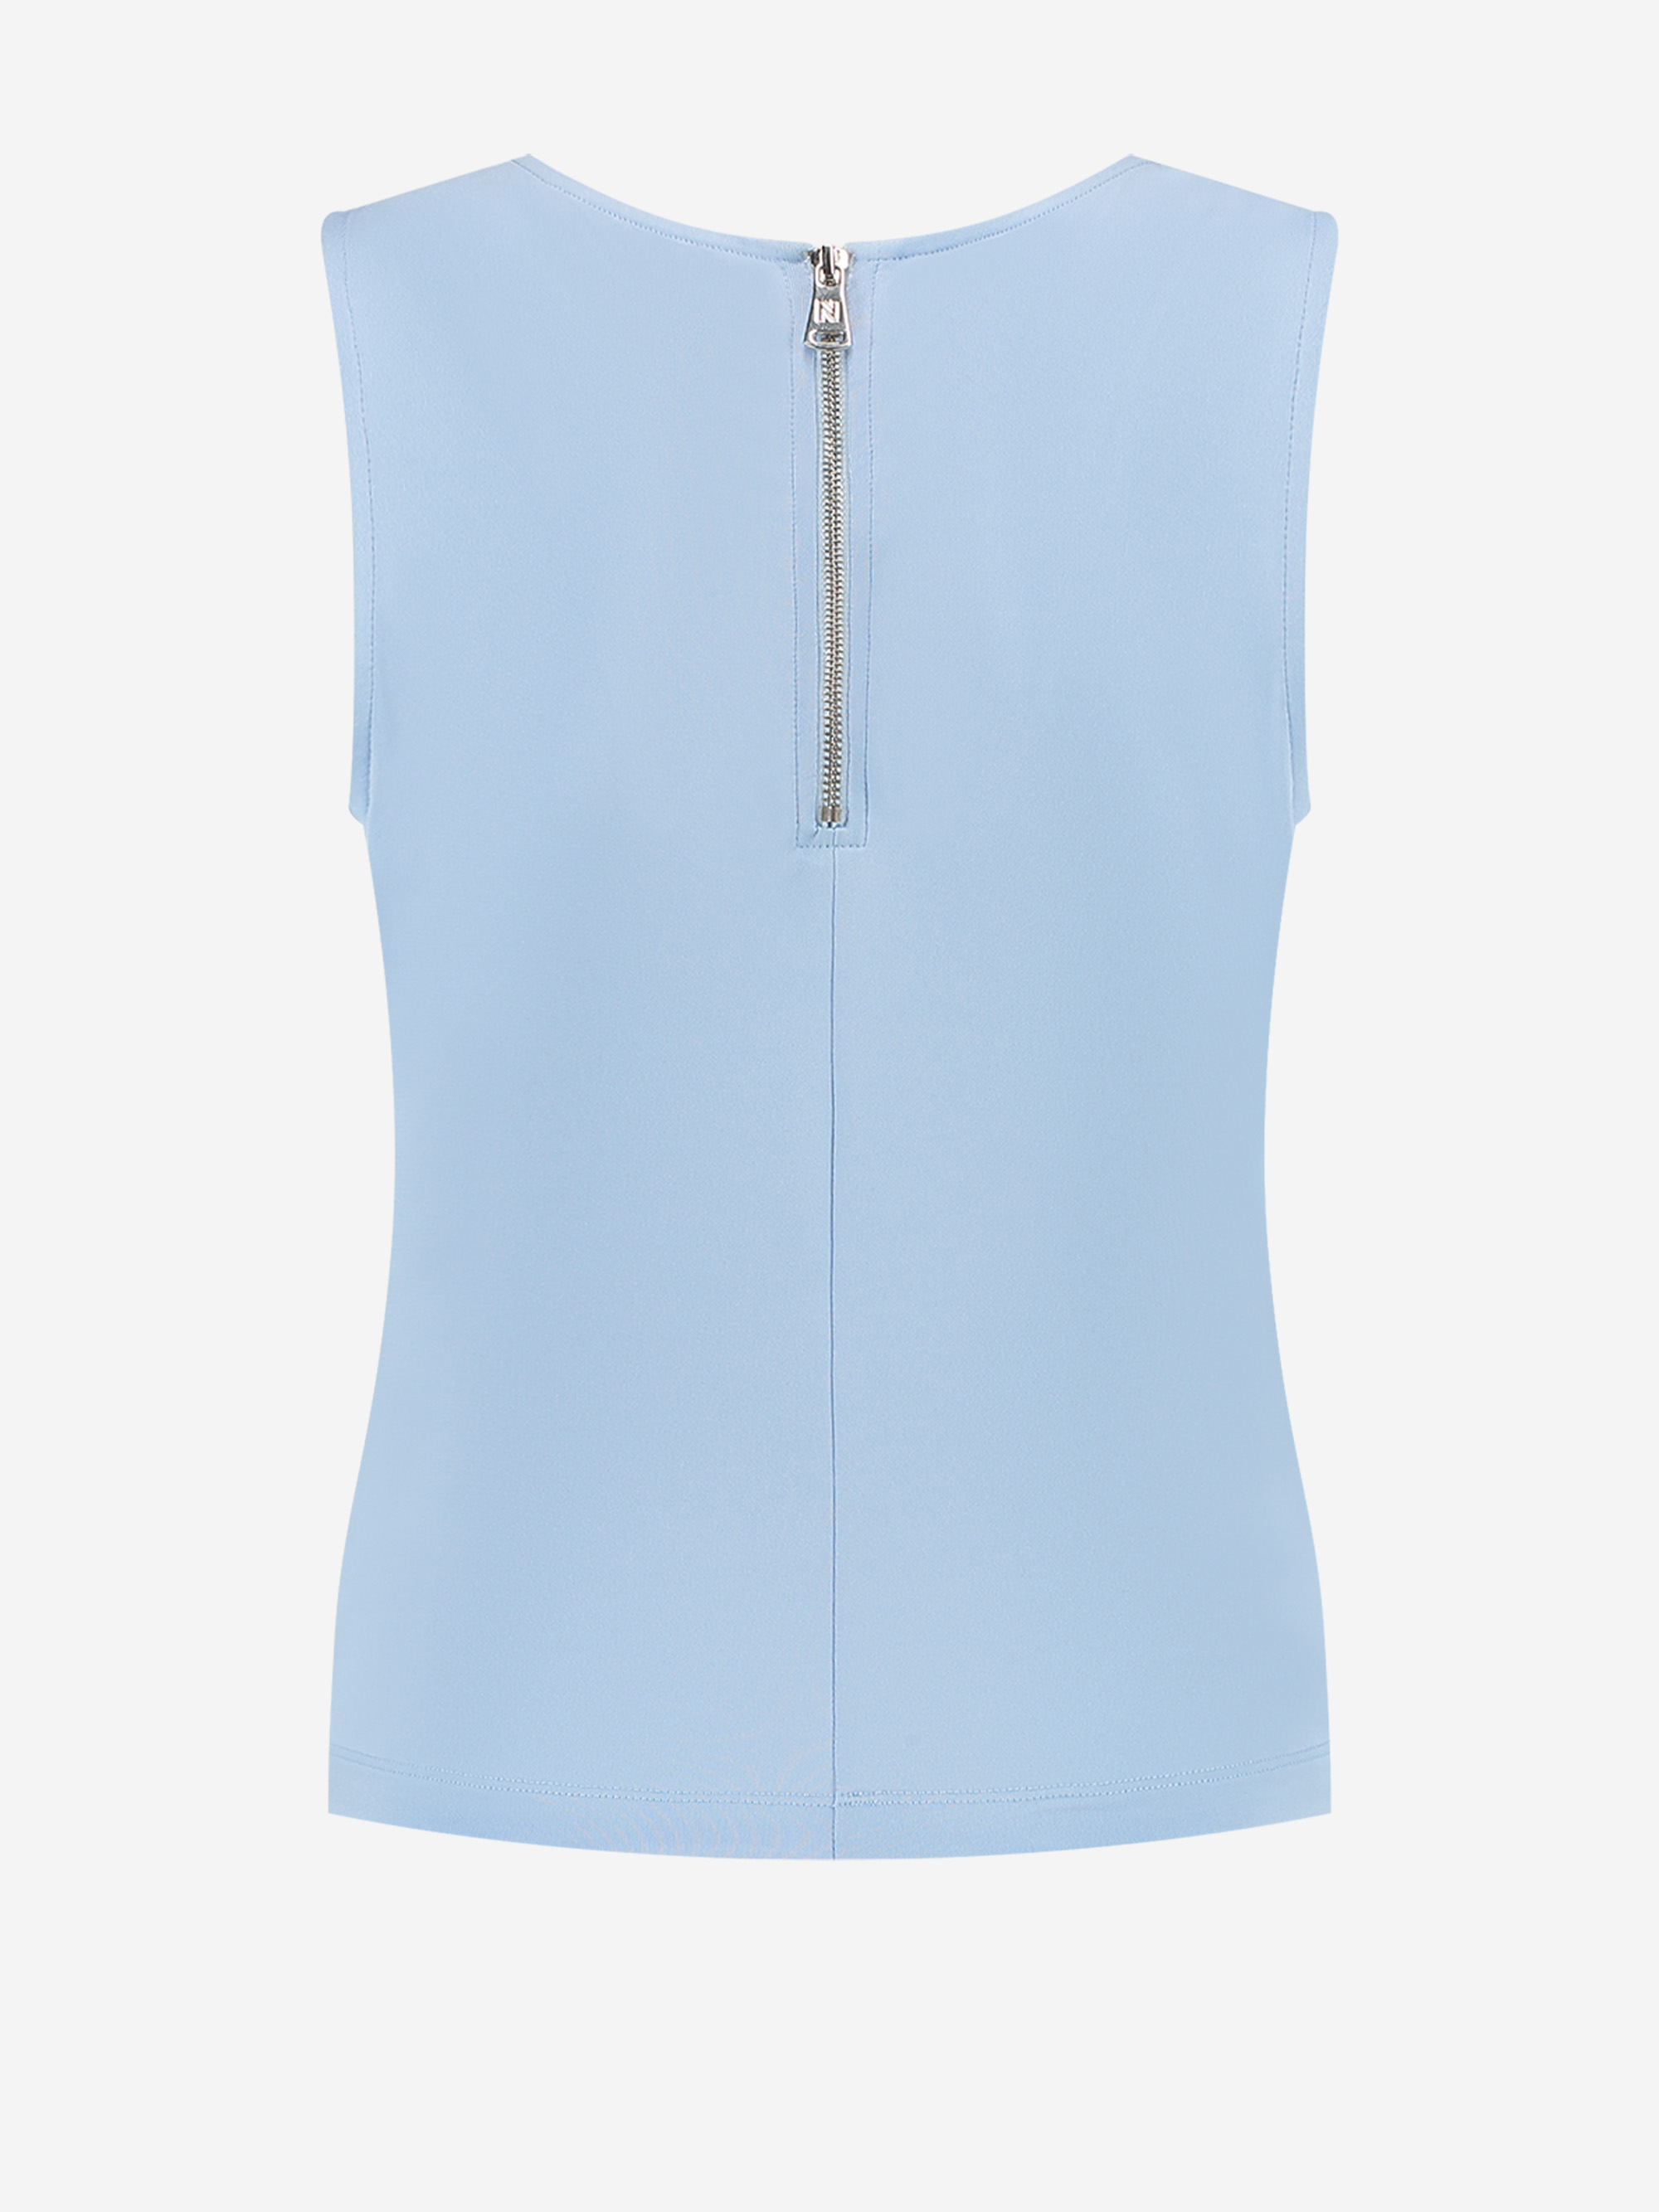 Sleeveless top with cutout